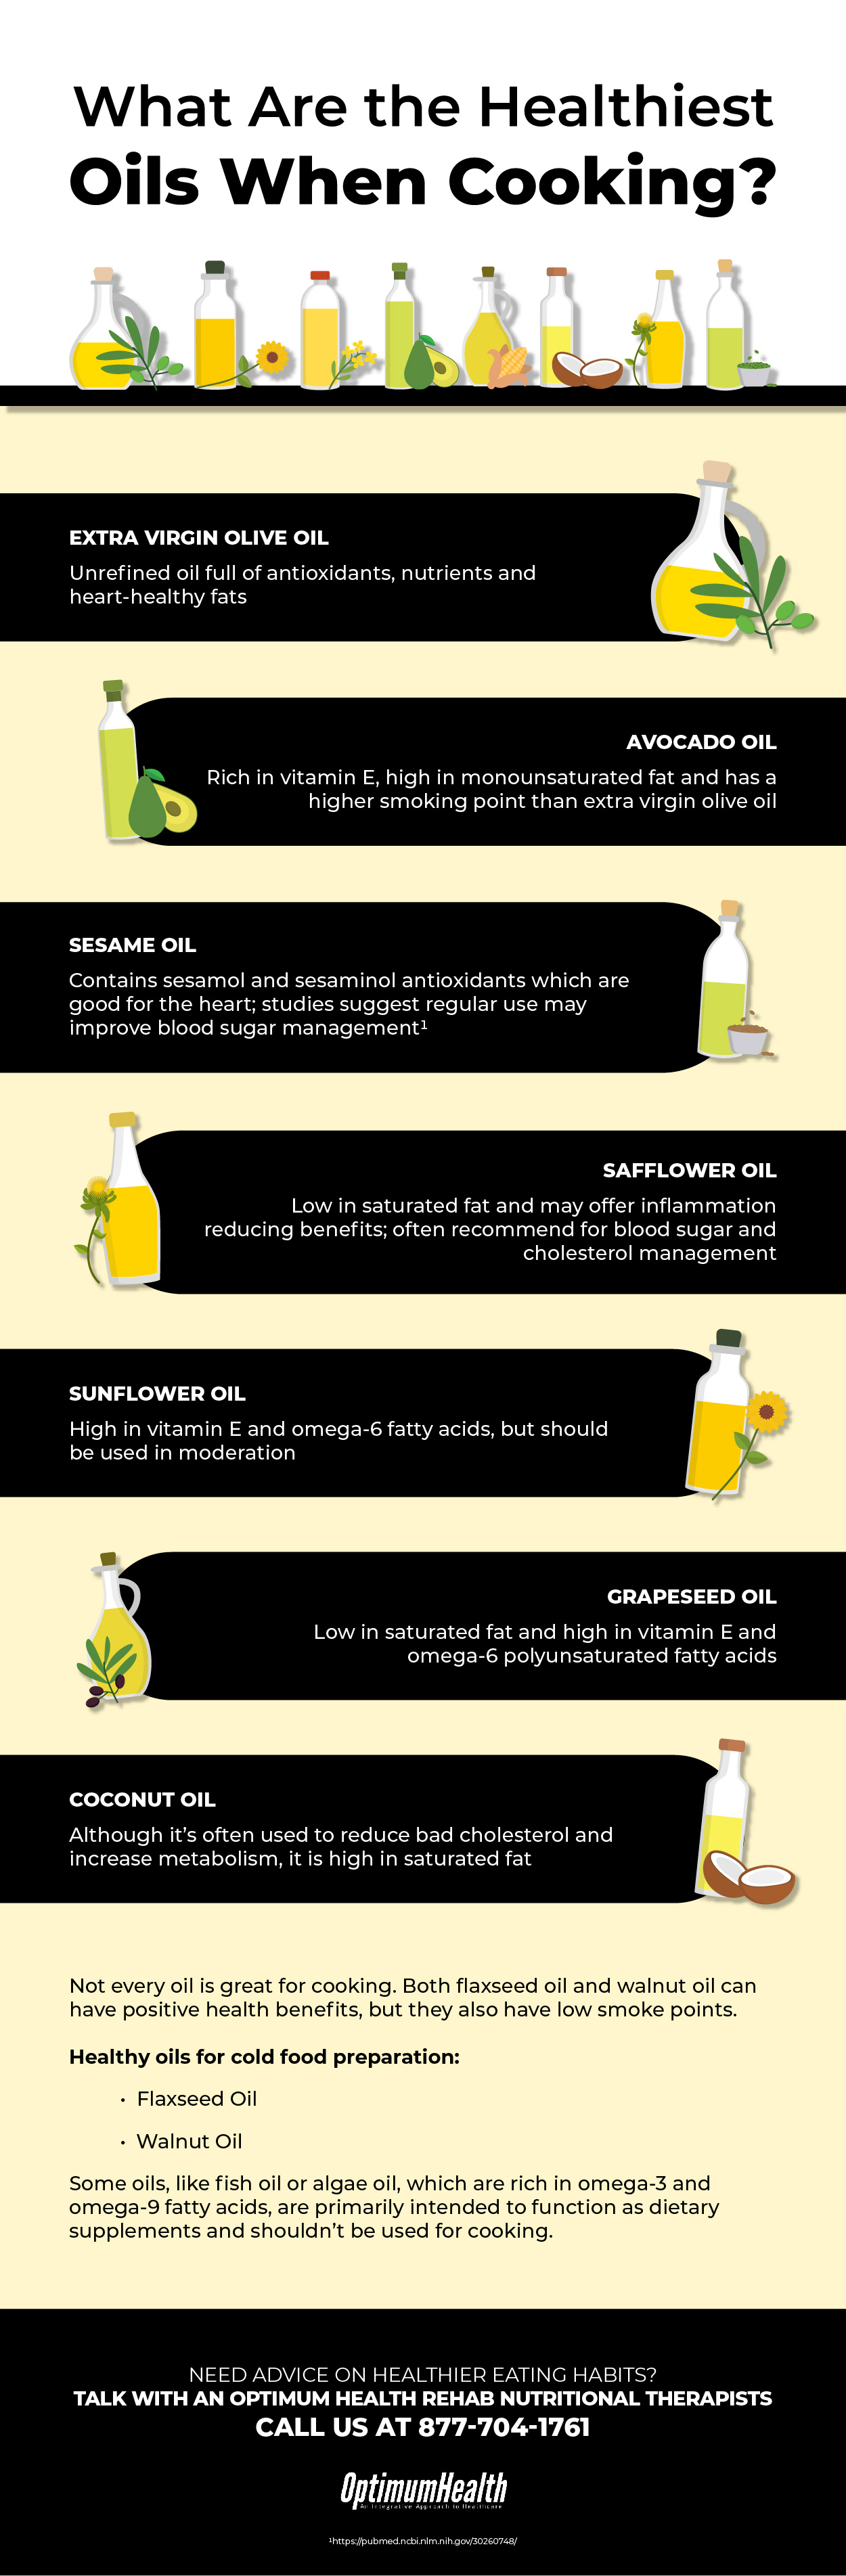 What Are the Healthiest Oils to Cook With